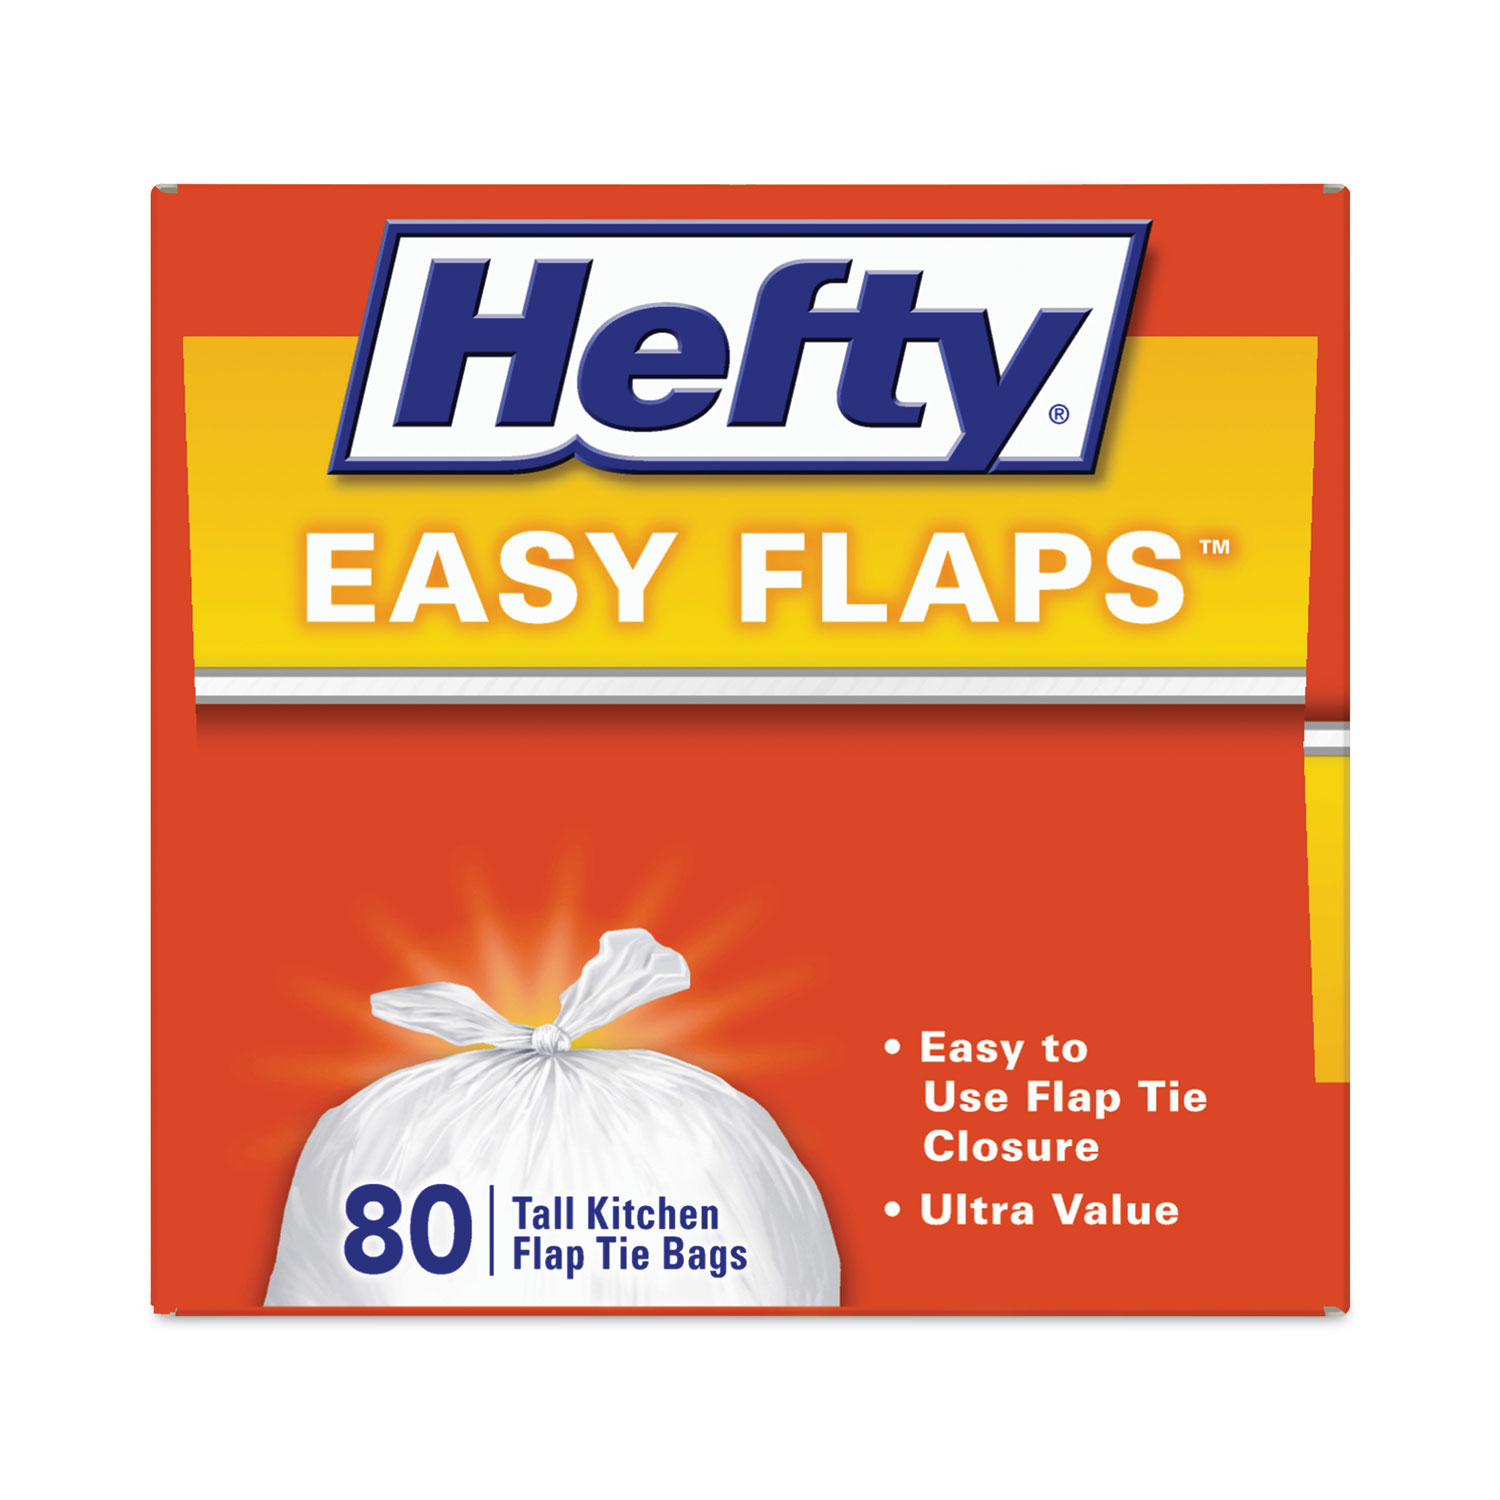 Hefty Small Garbage Bags, Flap Tie, Lavender & Sweet Vanilla Scent